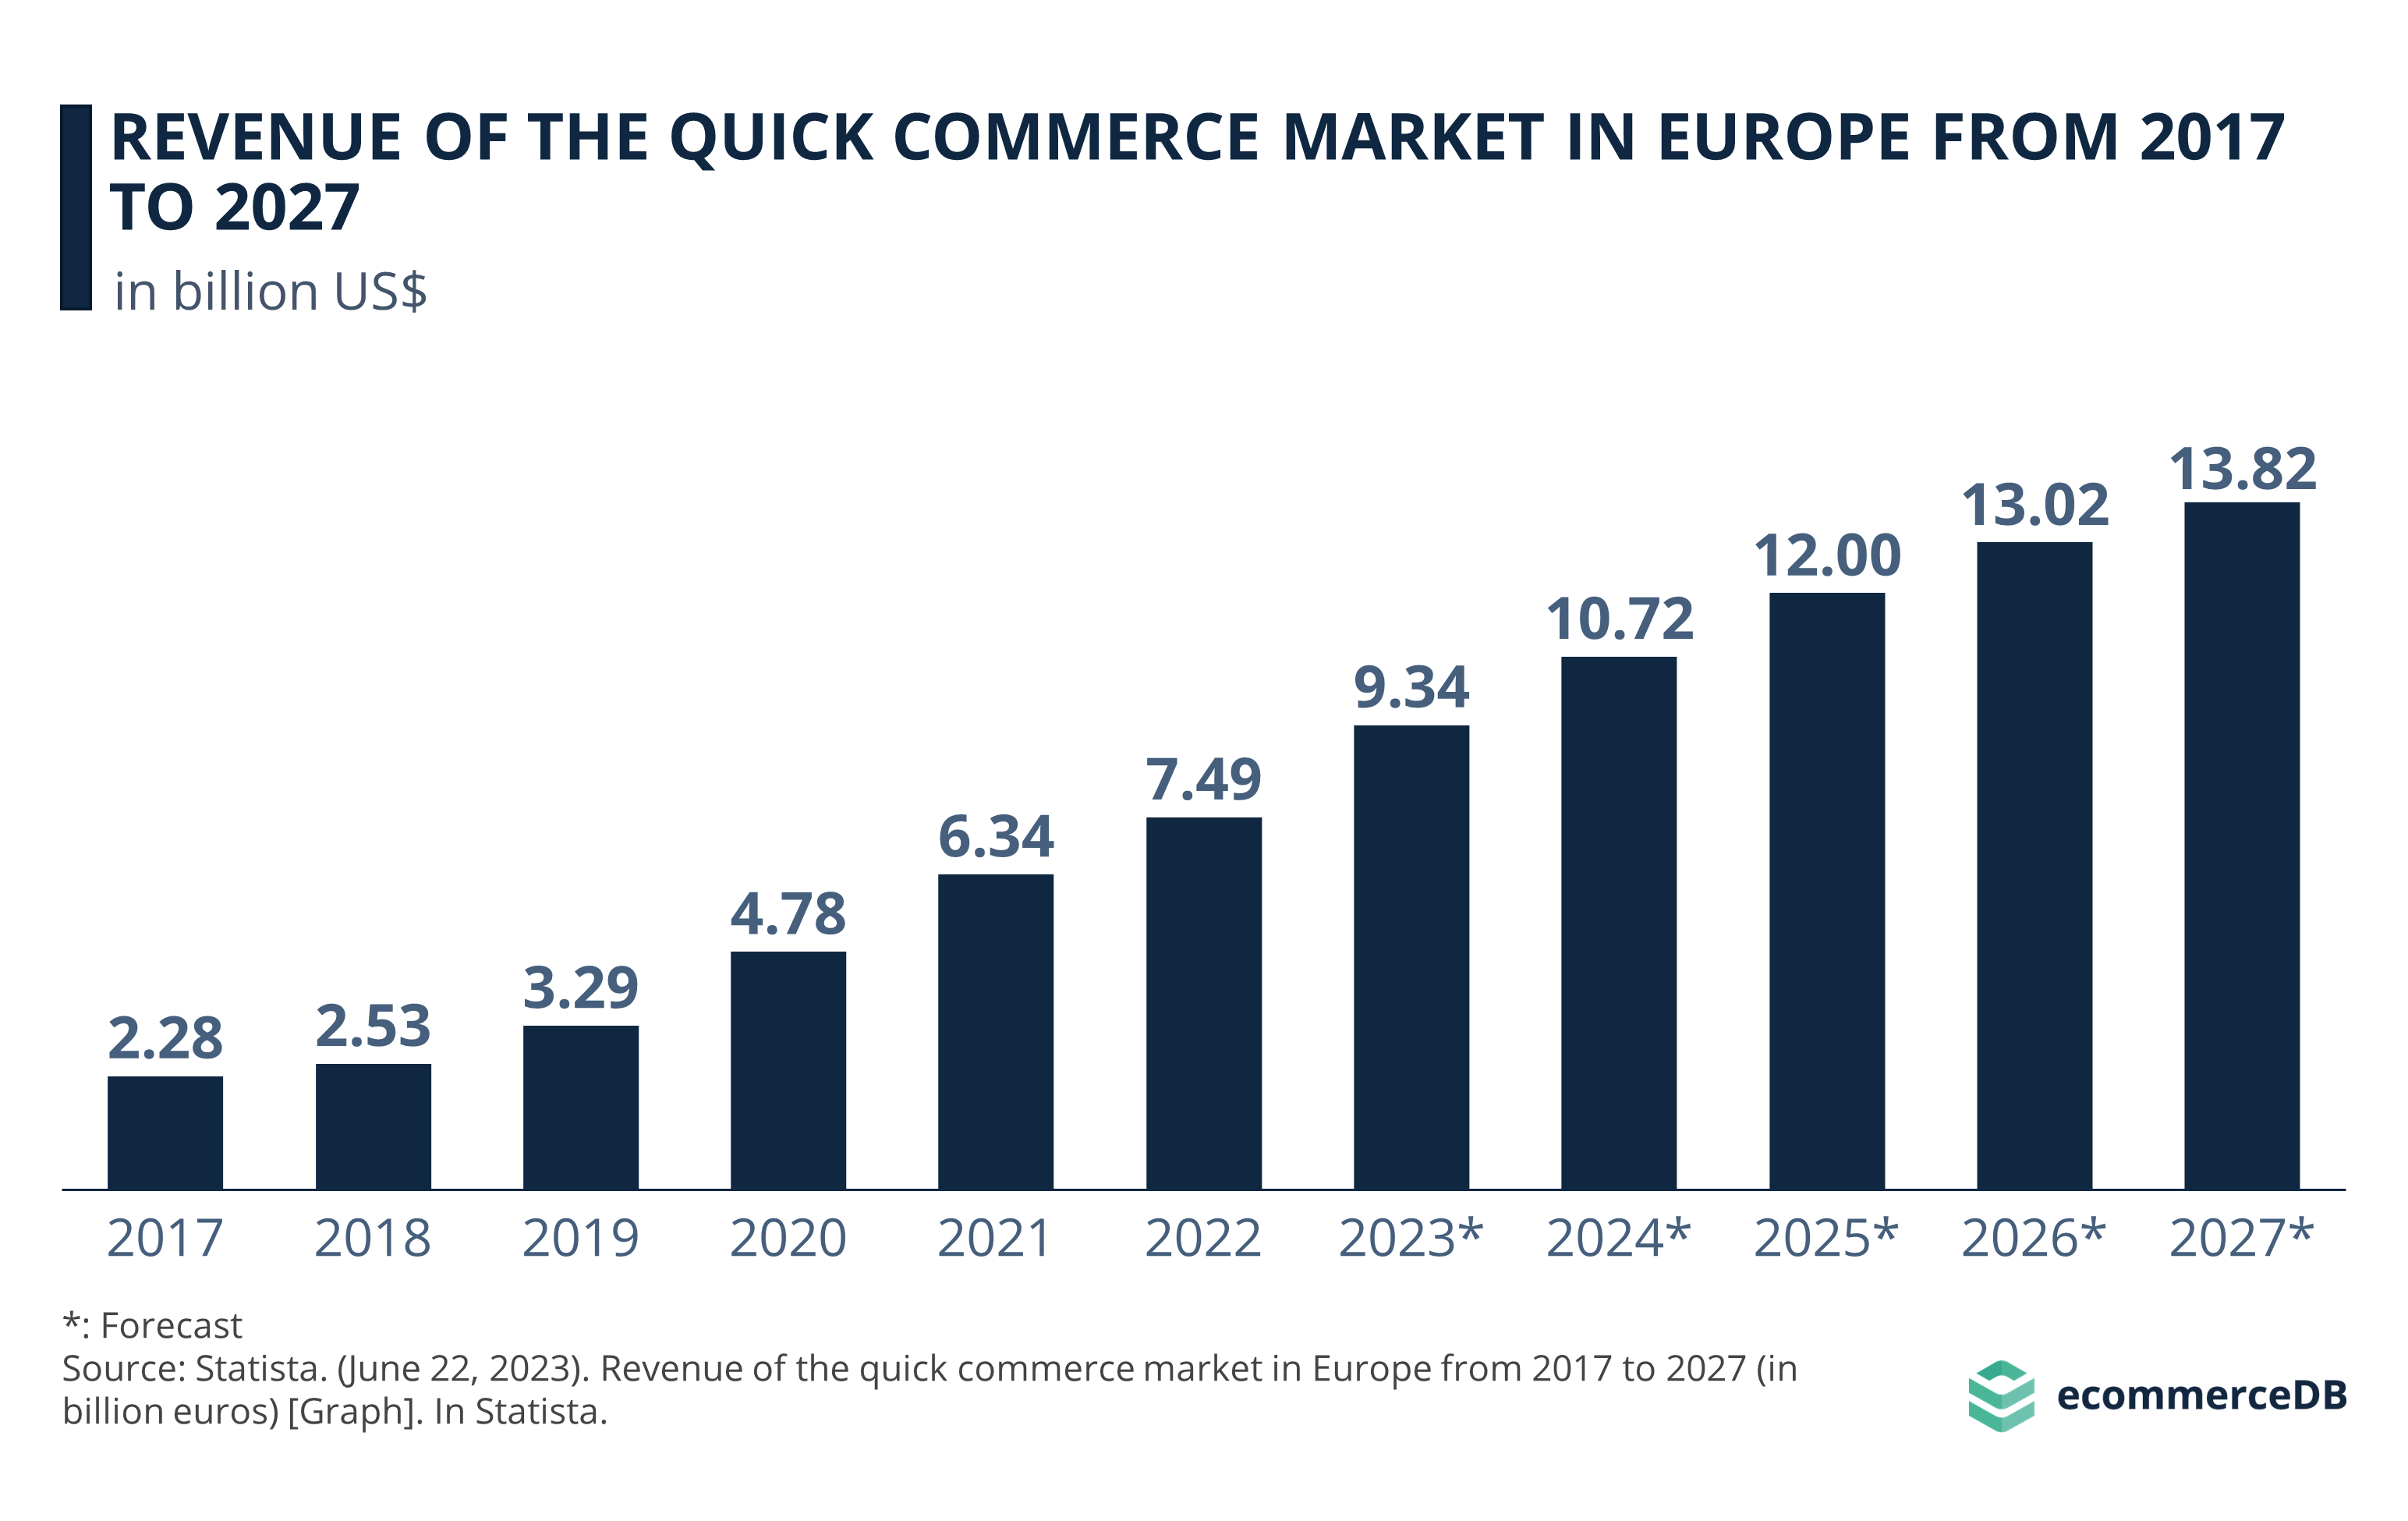 Revenue of the Quick Commerce Market in Europe from 2017 to 2027